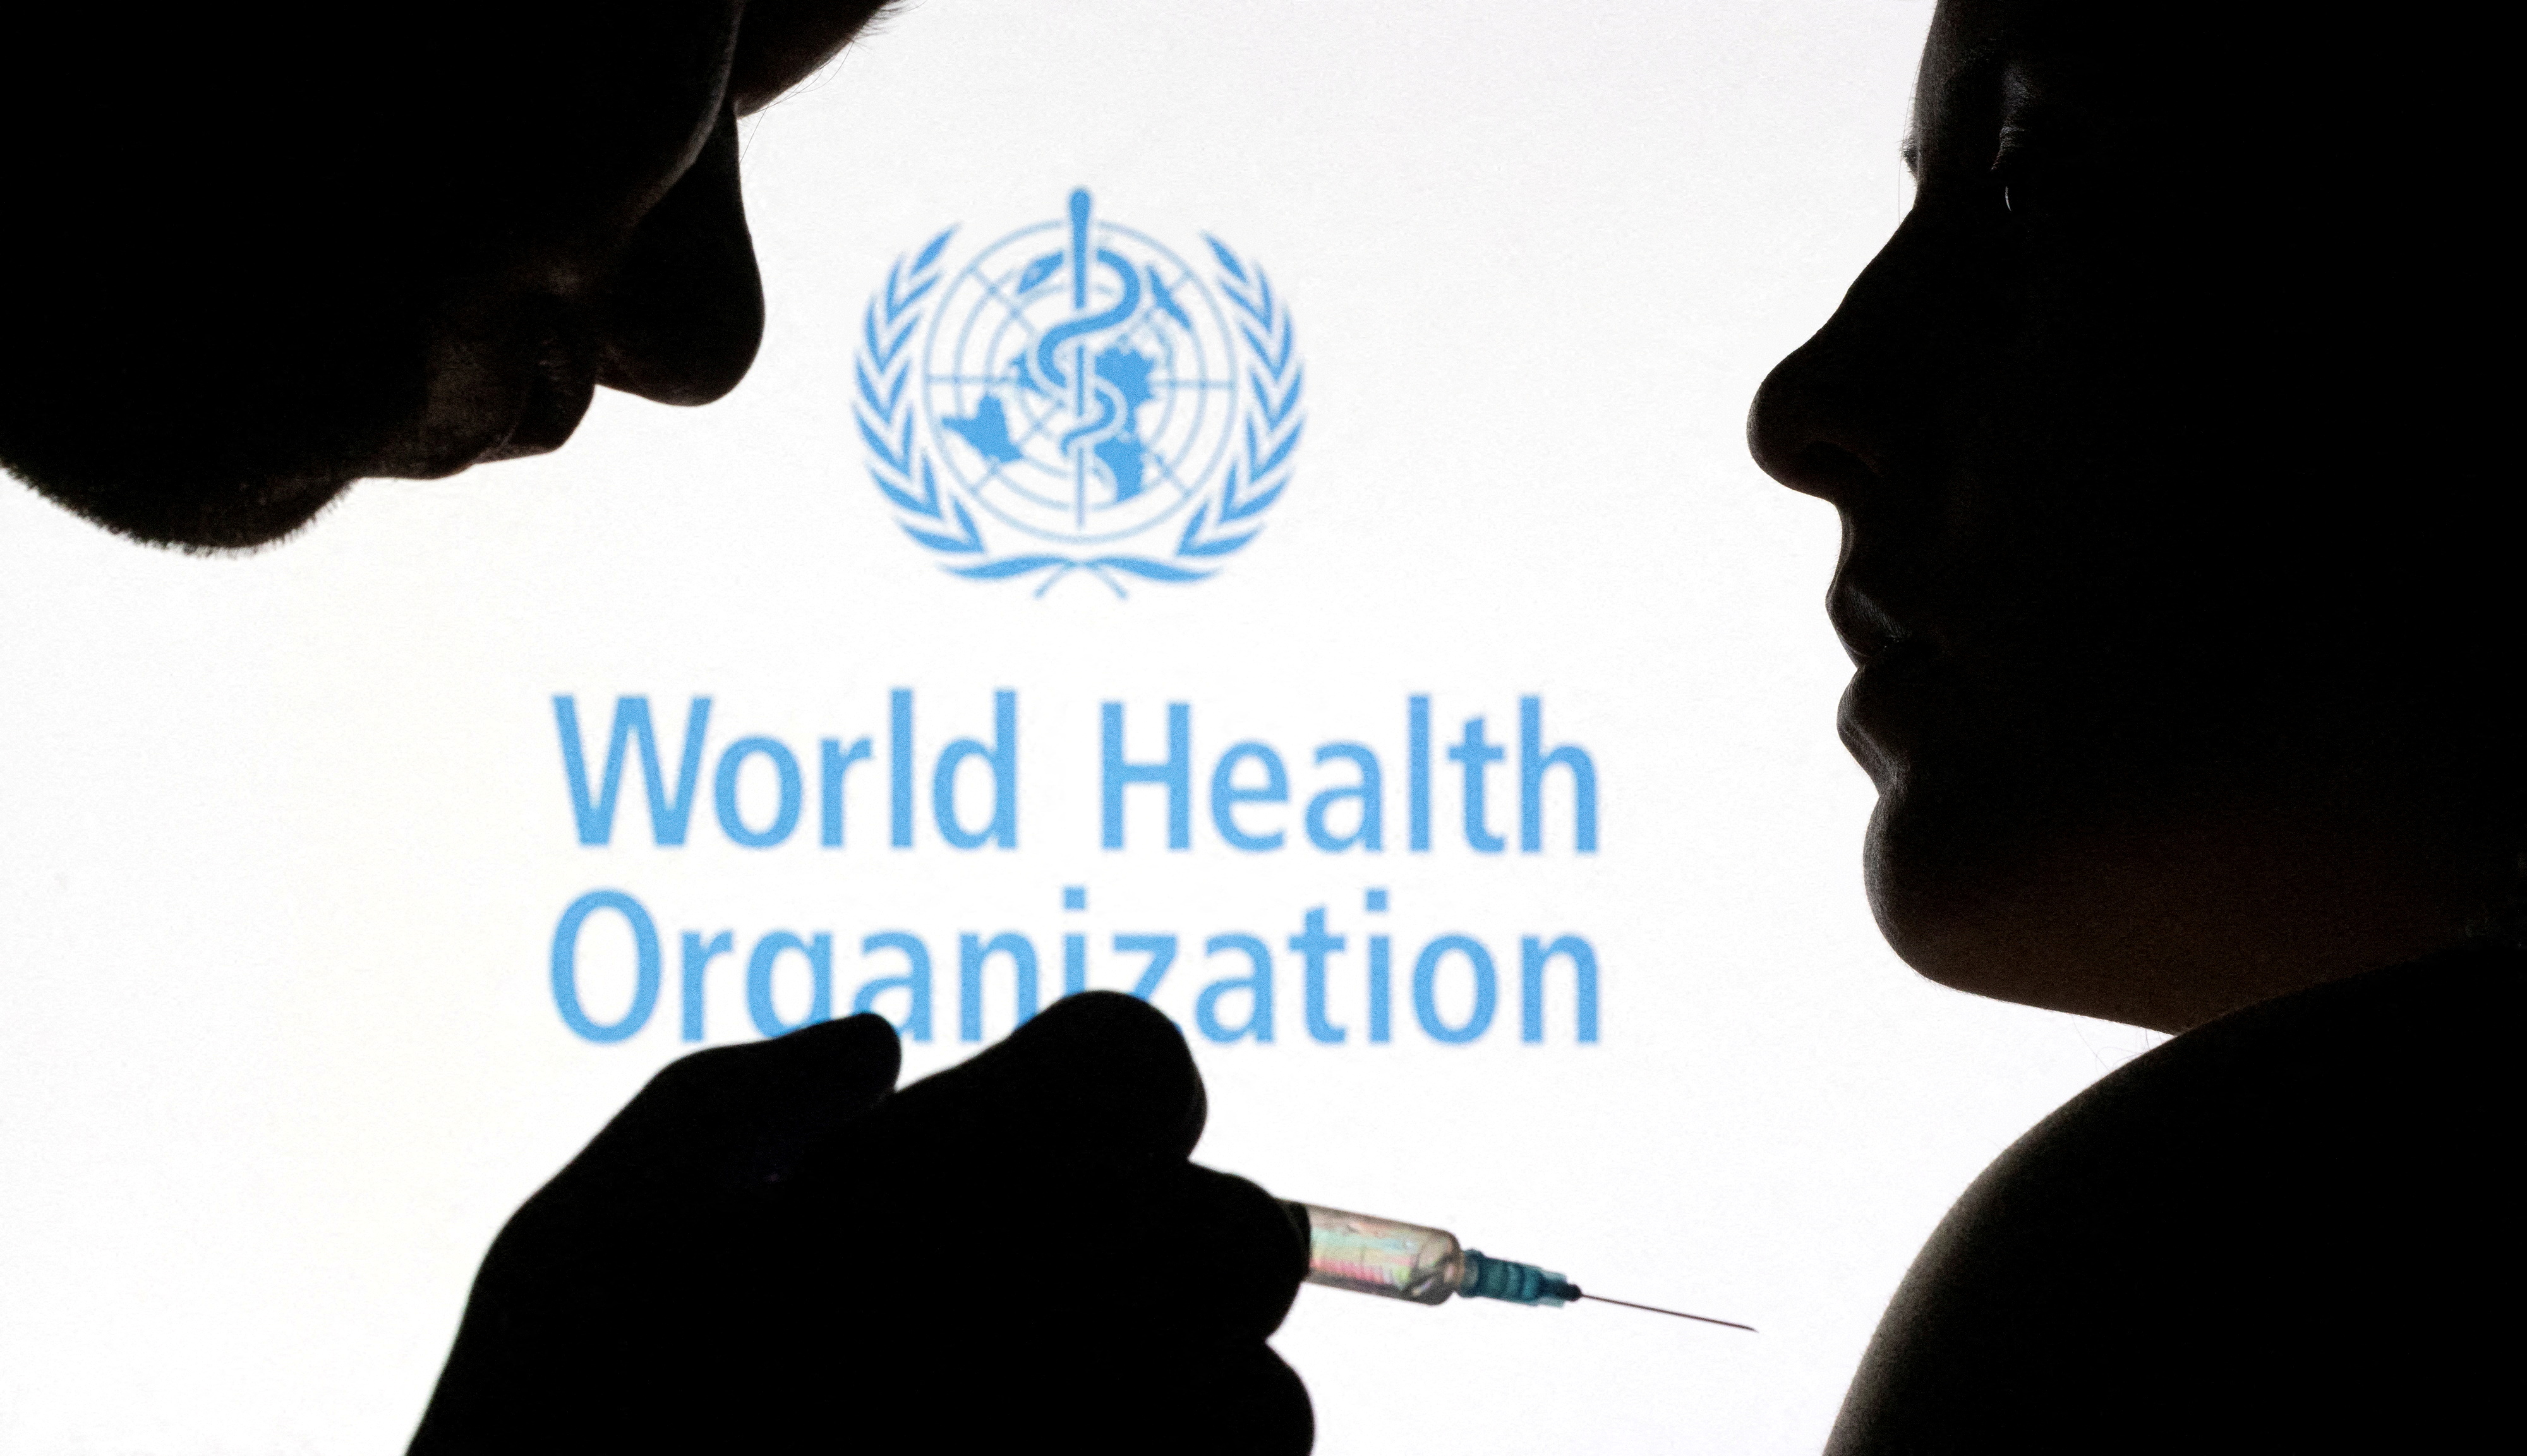 People pose with syringe and needle in front of displayed WHO logo